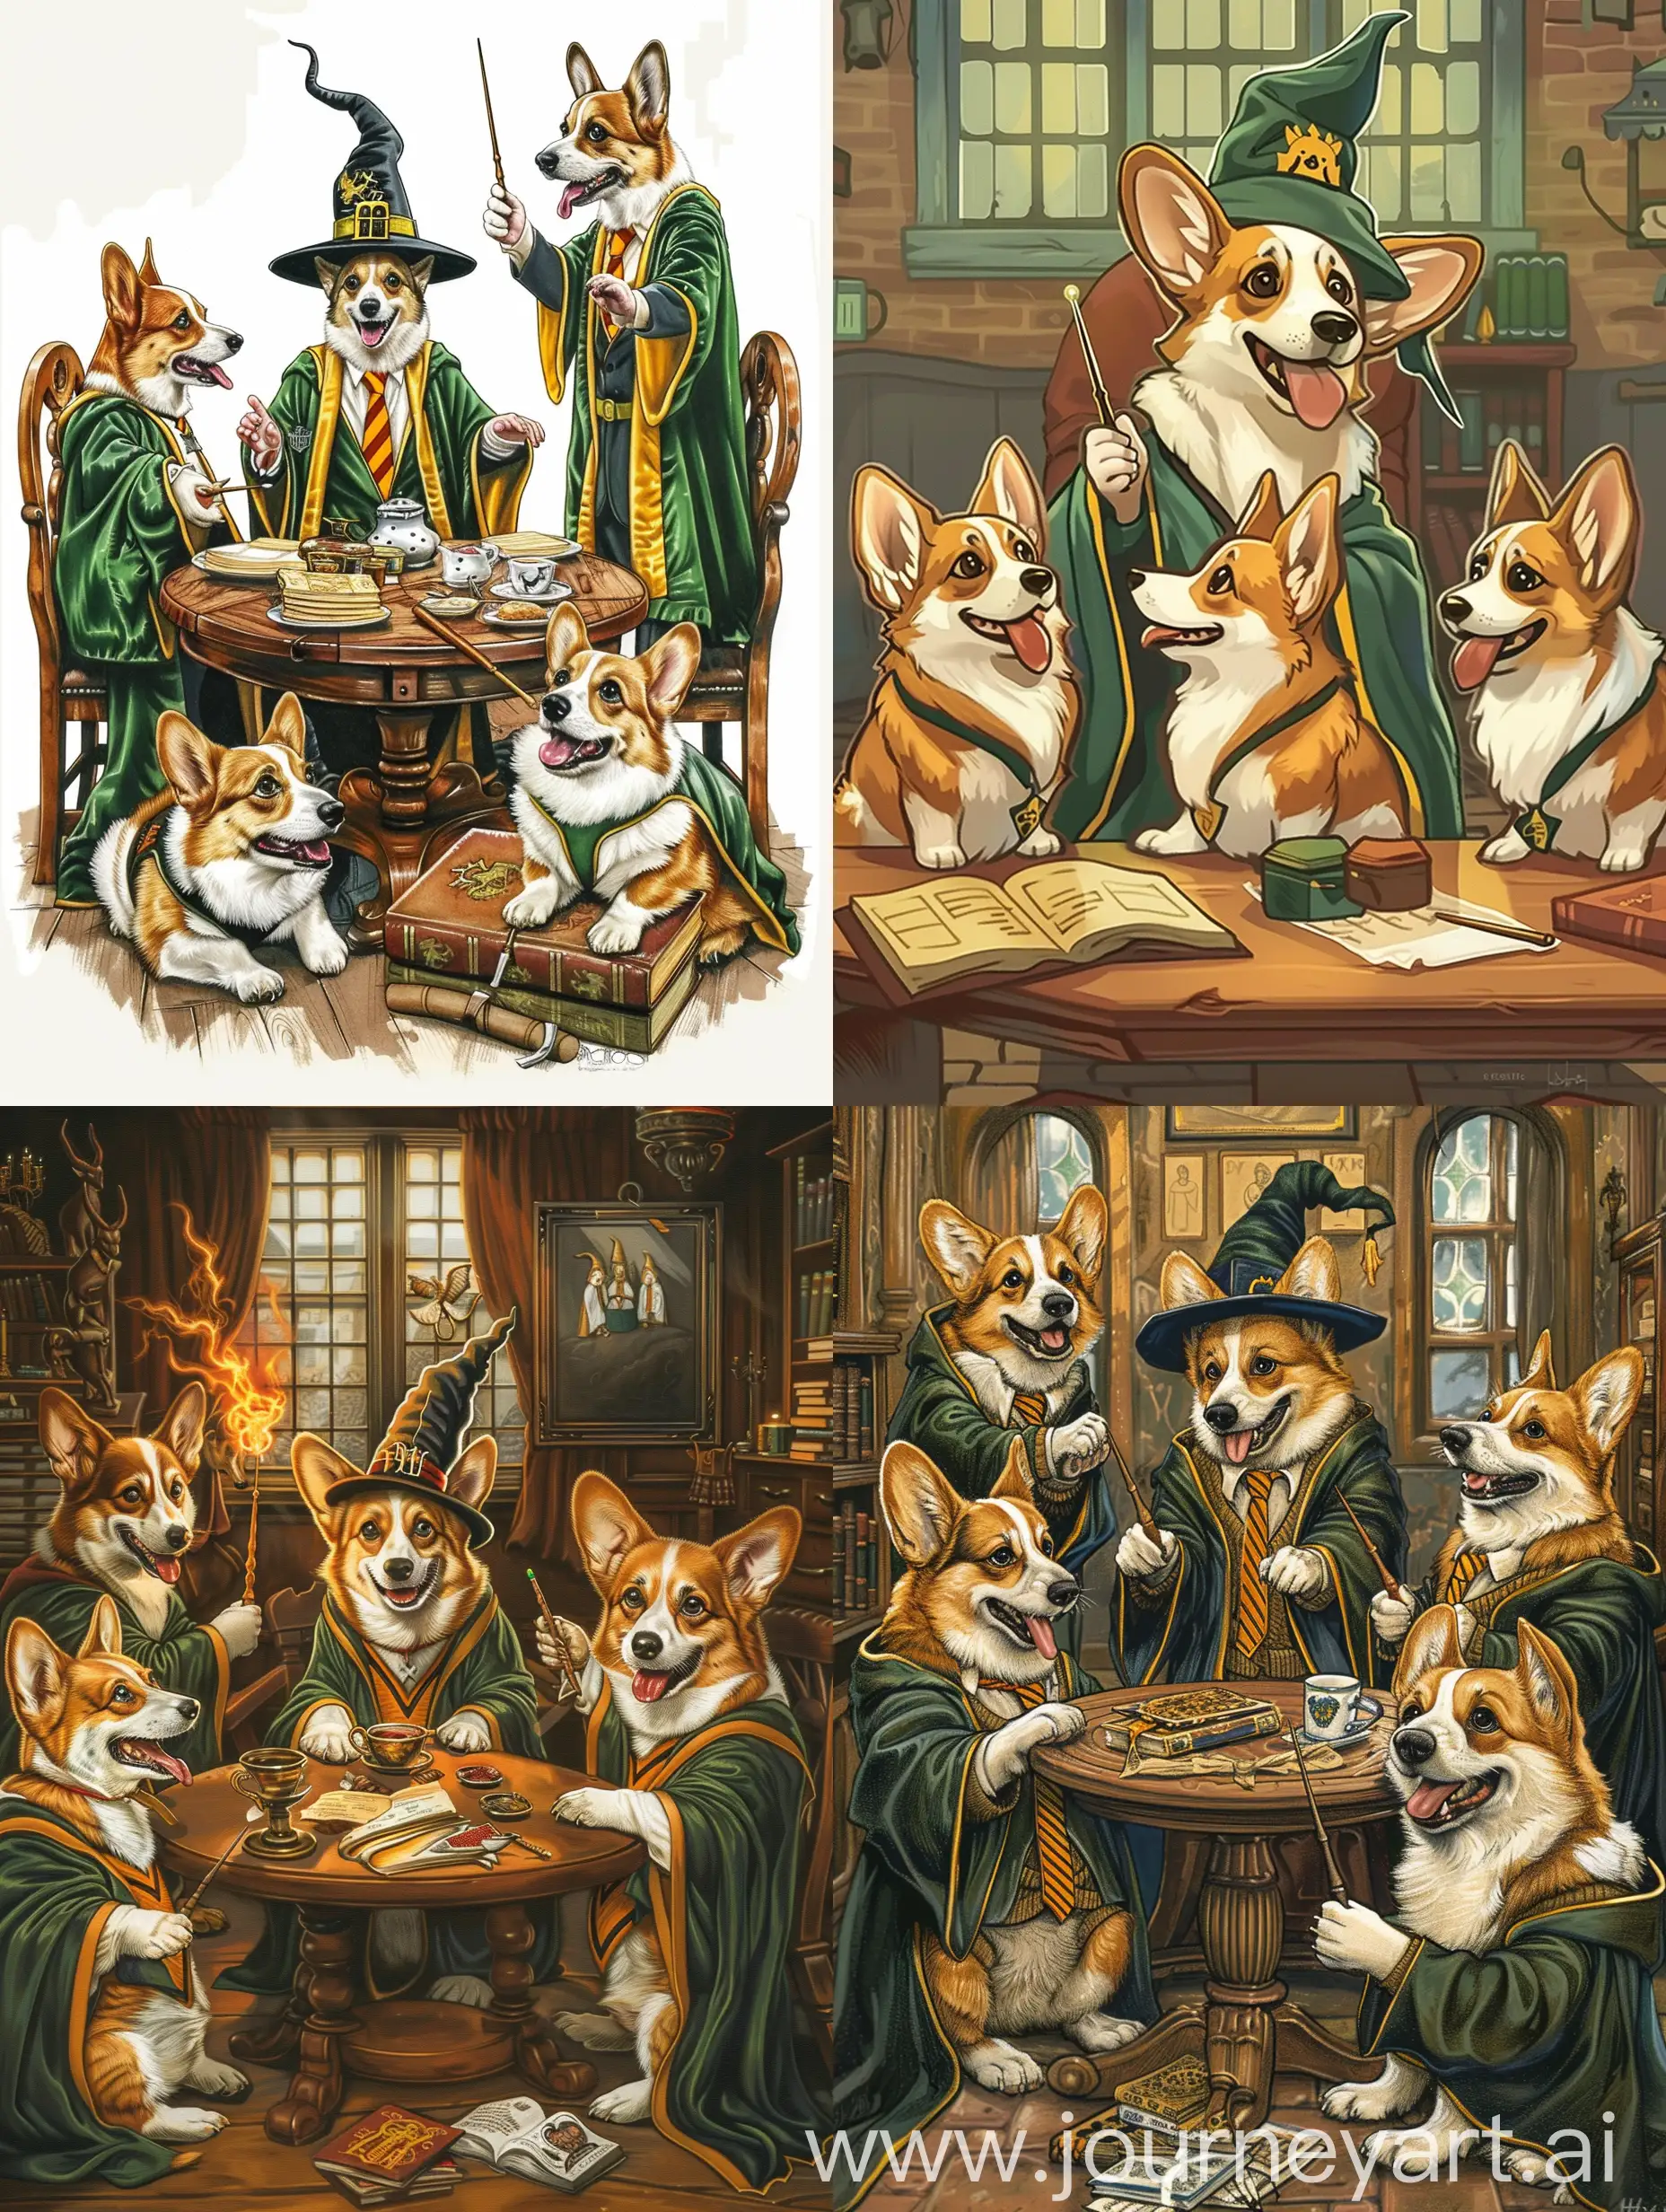 cude corgi dogs, hogwarts, slytherin robes, wizard hat, wand, magical, comic style, sitting around a table